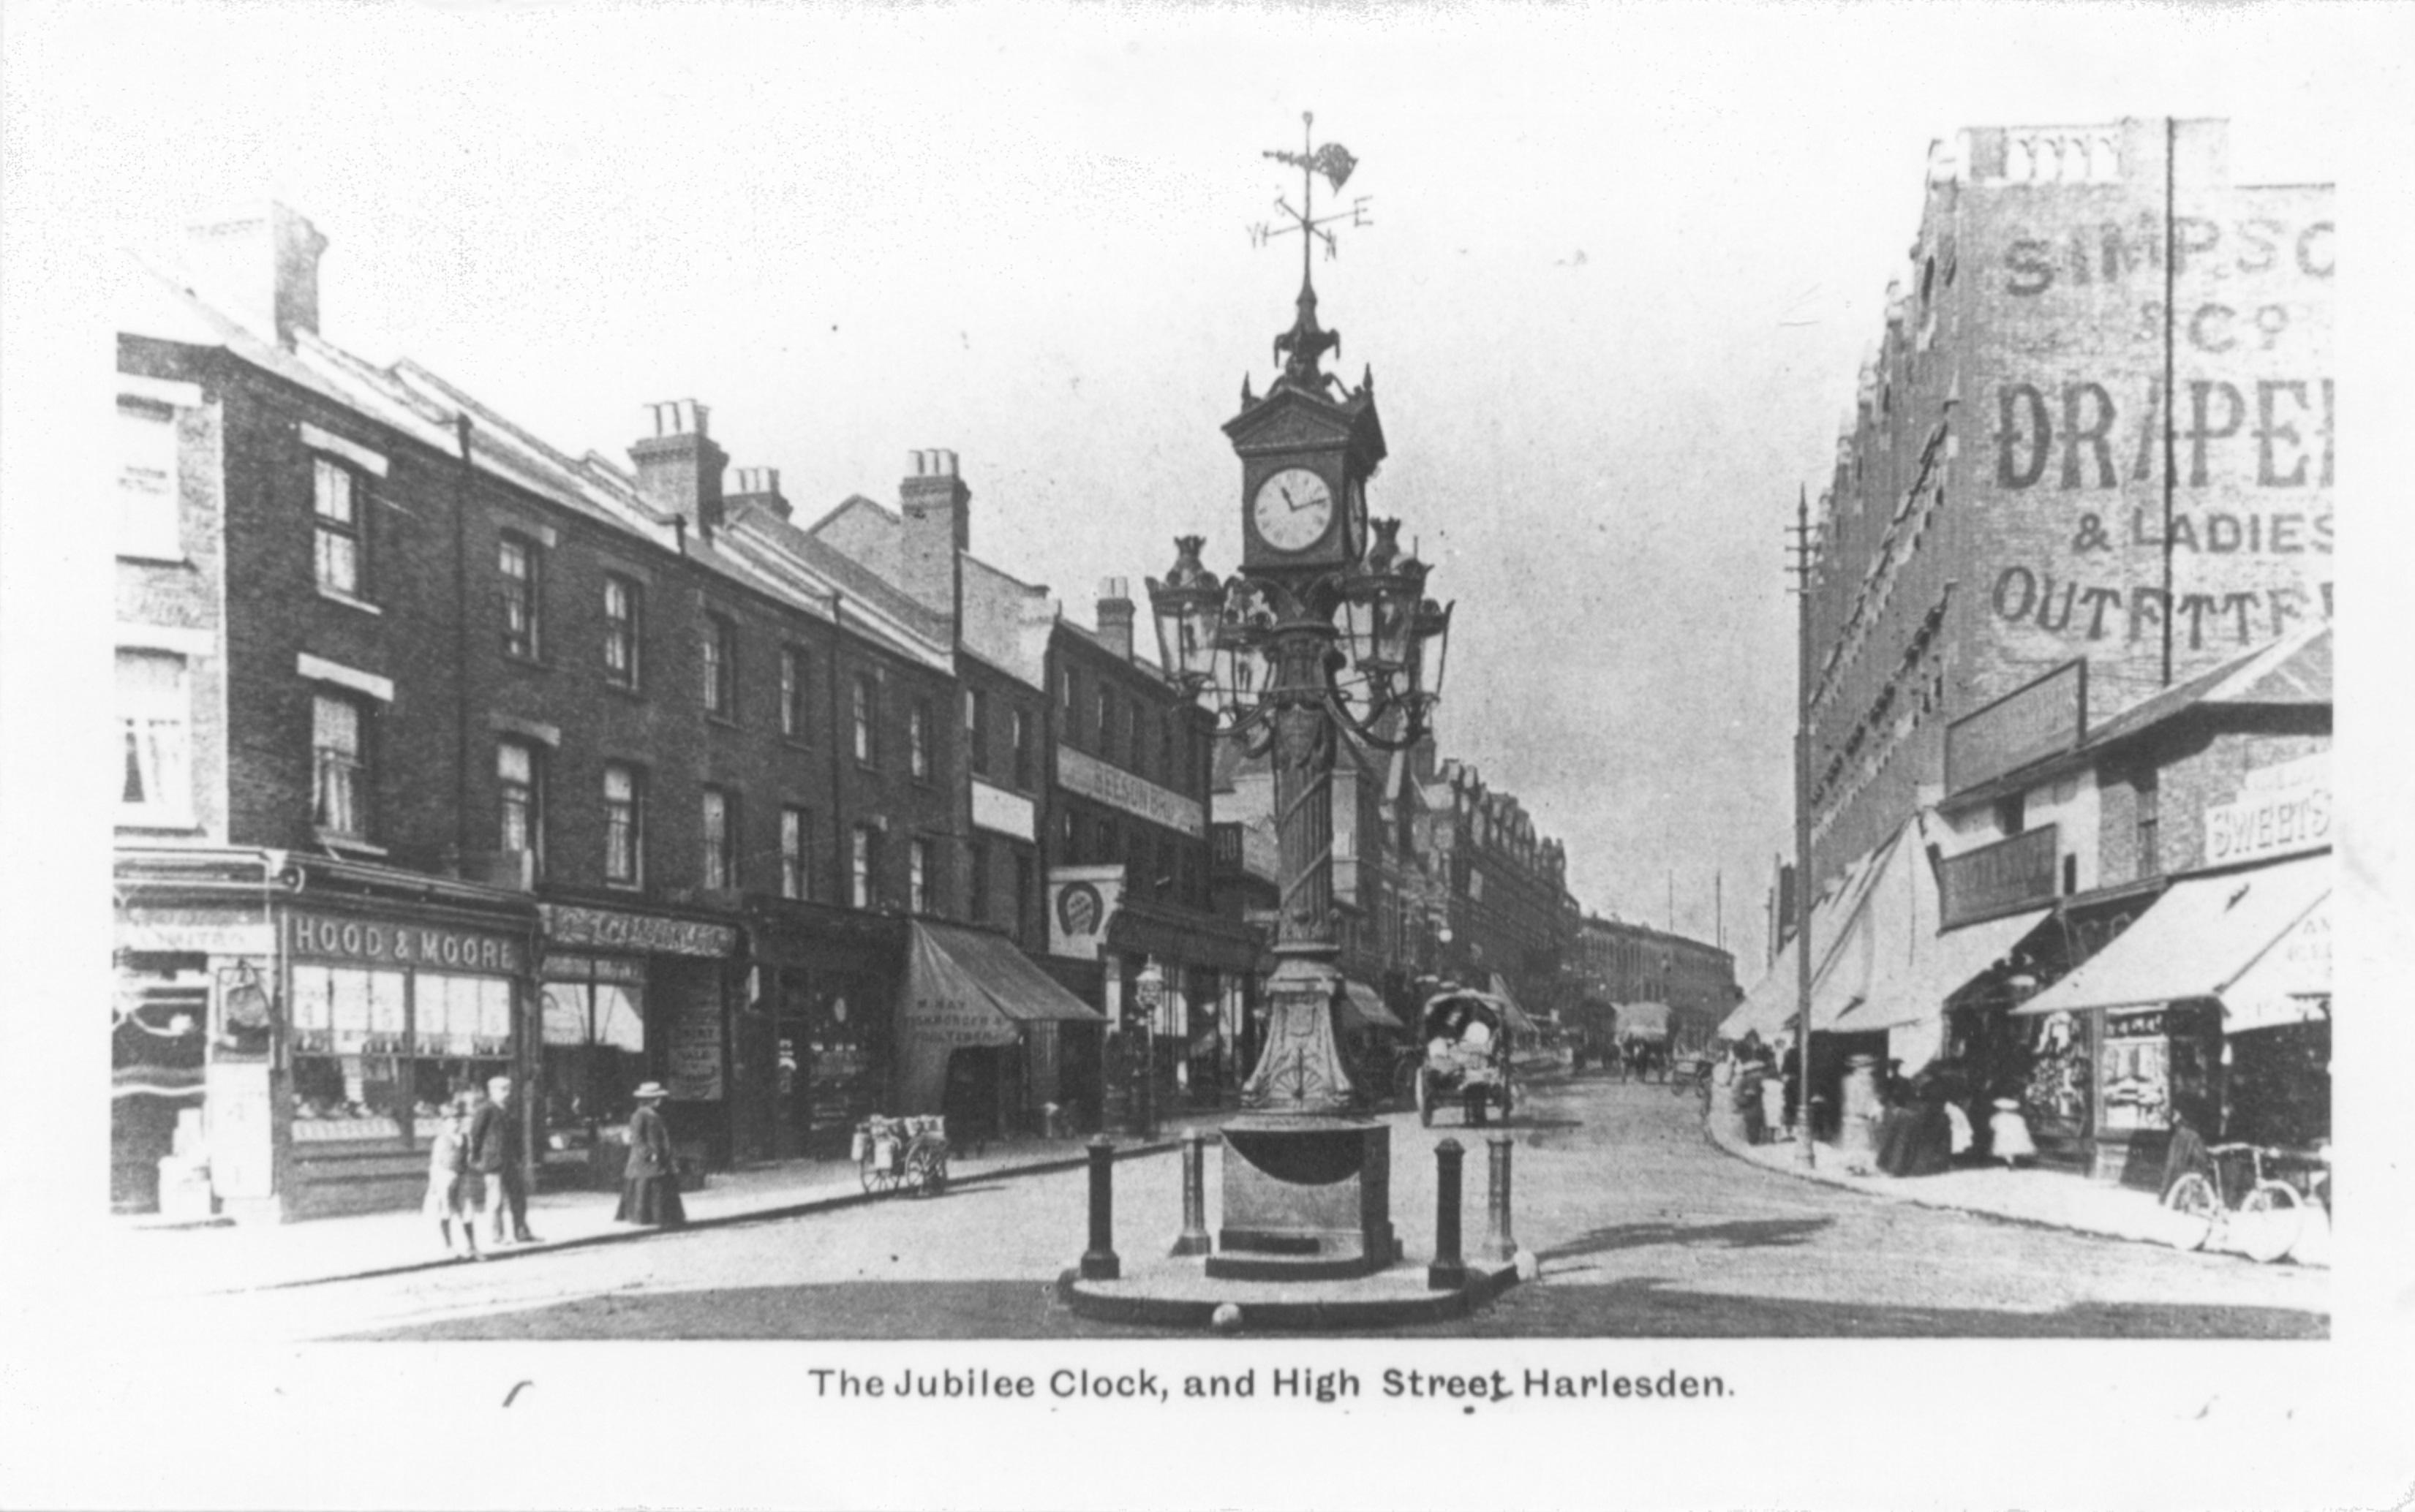 Black and white photograph showing a London street junction. An historic clock is in the centre of the junction. The shops have awnings and people are visible wearing dress from around the 1900s.